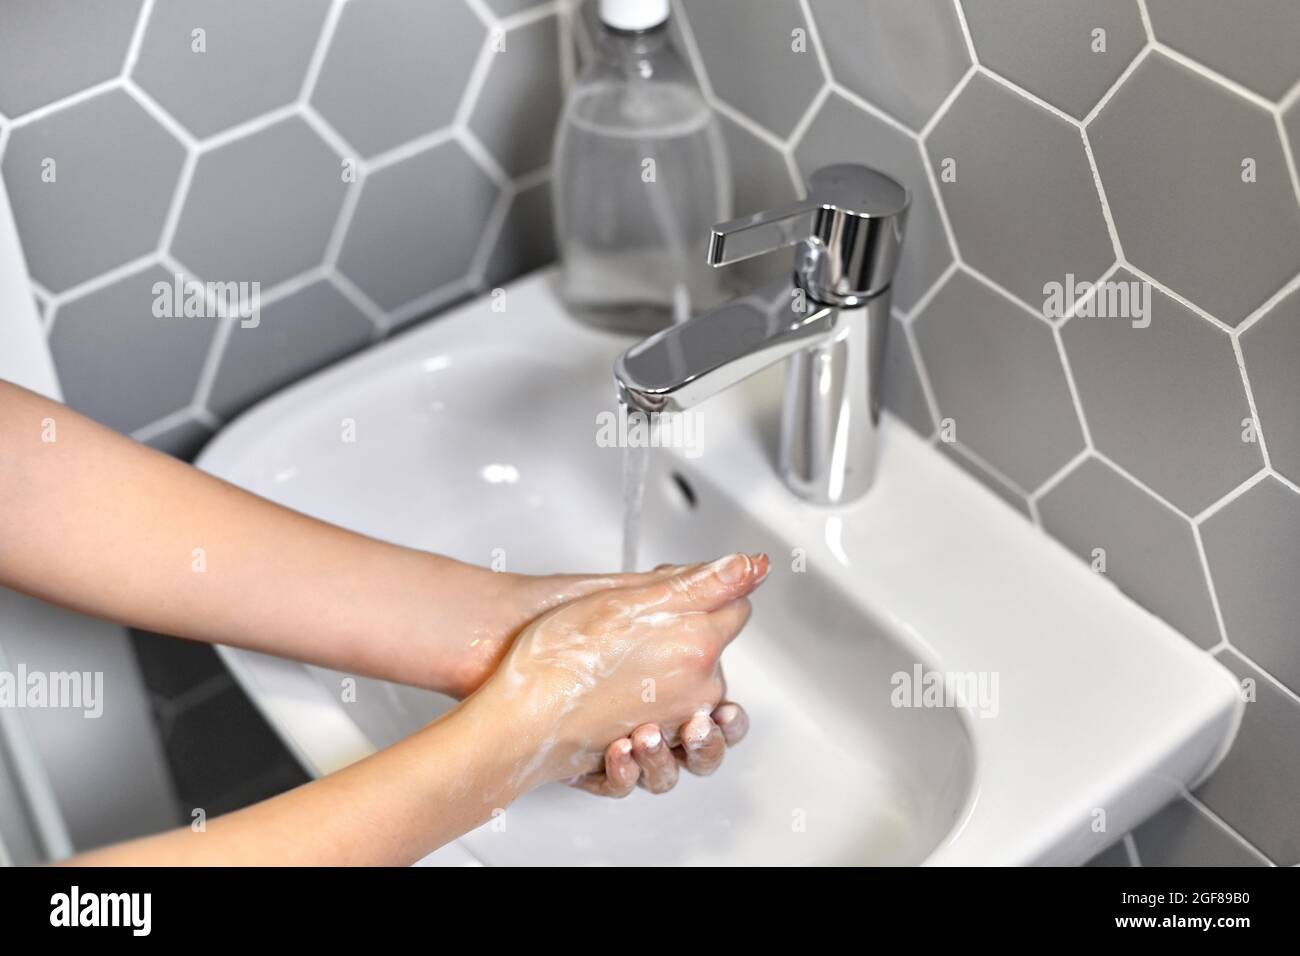 close up of woman washing hands with liquid soap Stock Photo